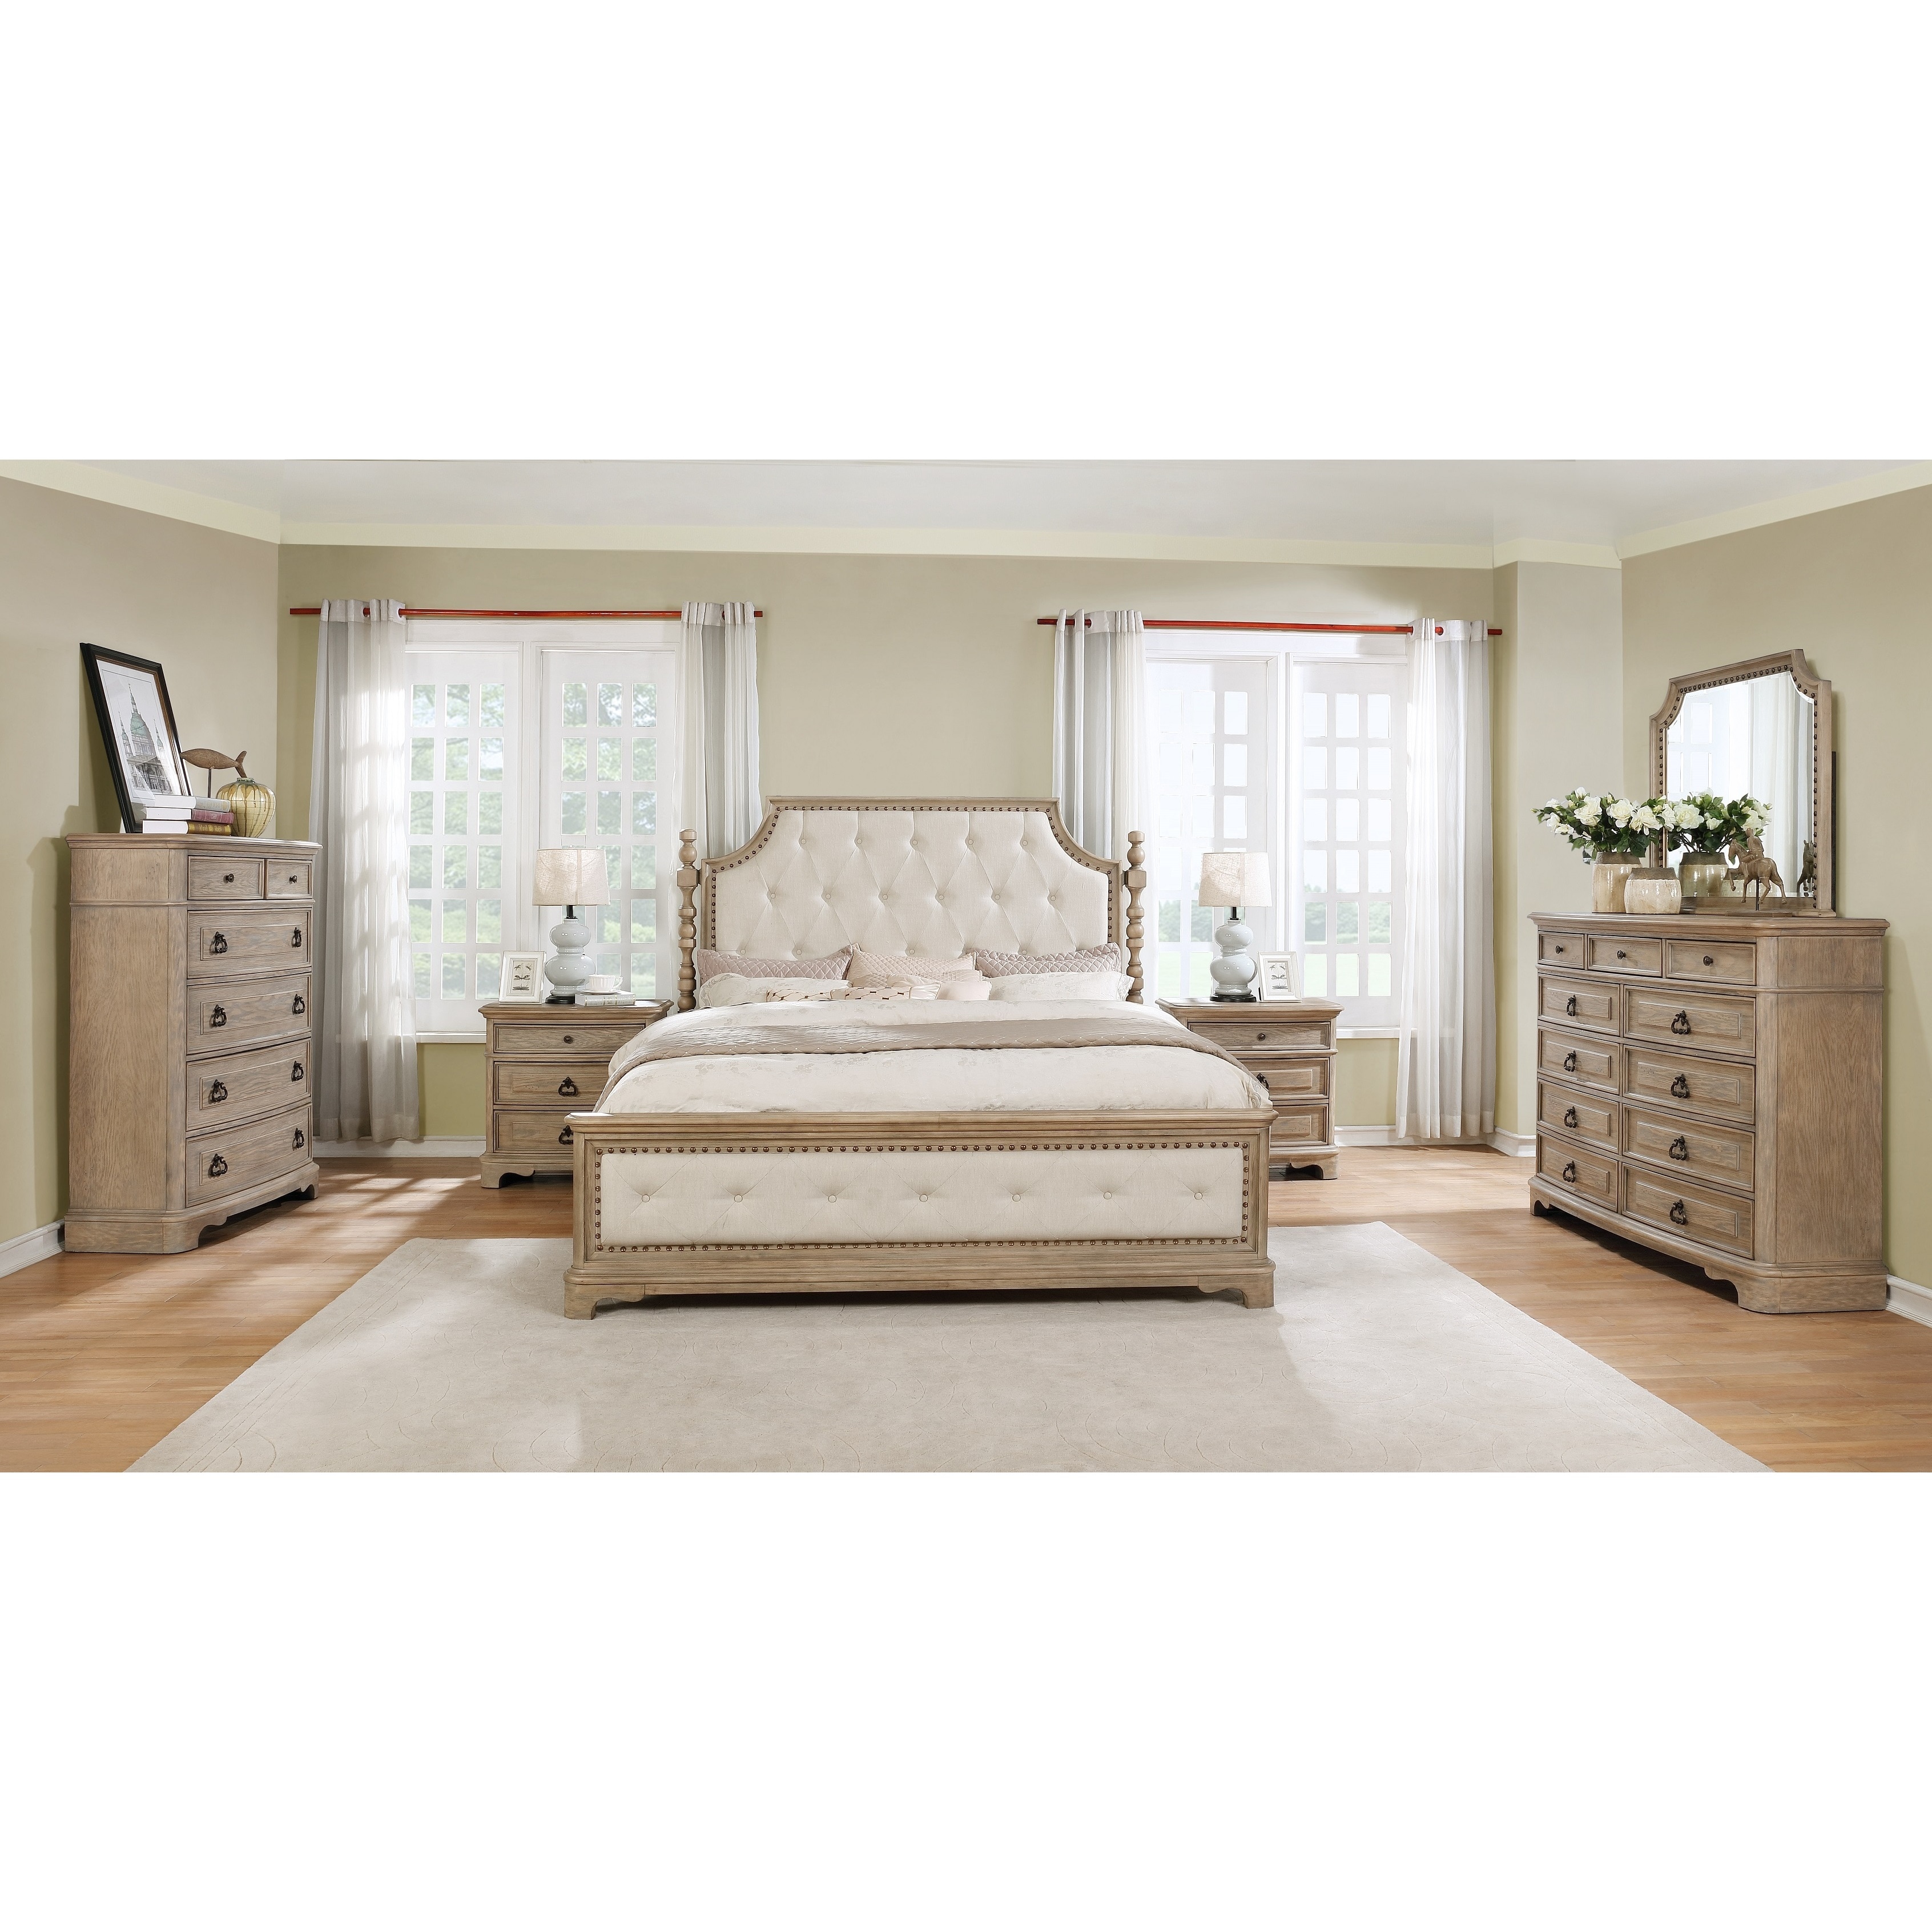 Piraeus 296 Solid Wood Construction Bedroom Set With Queen Size Bed Dresser Mirror Chest And 2 Night Stands